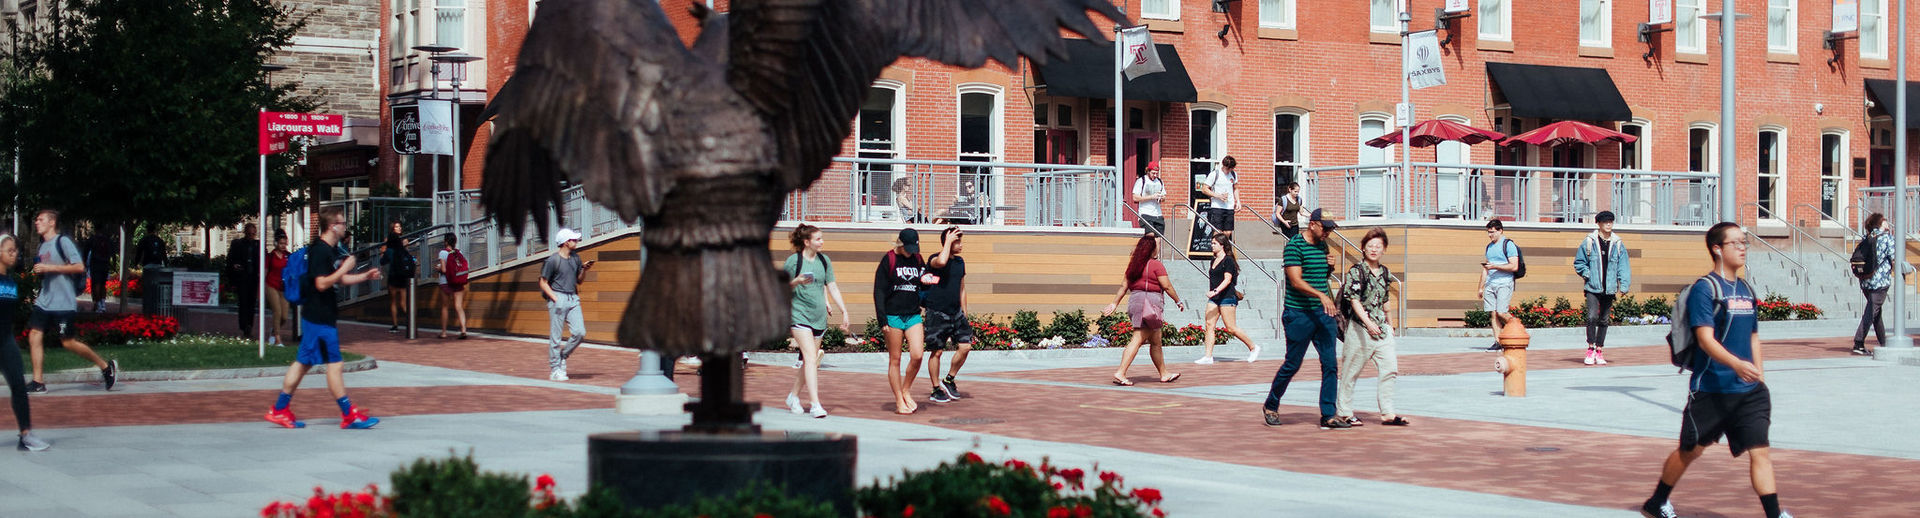 Students on Liacouras Walk on a sunny day.